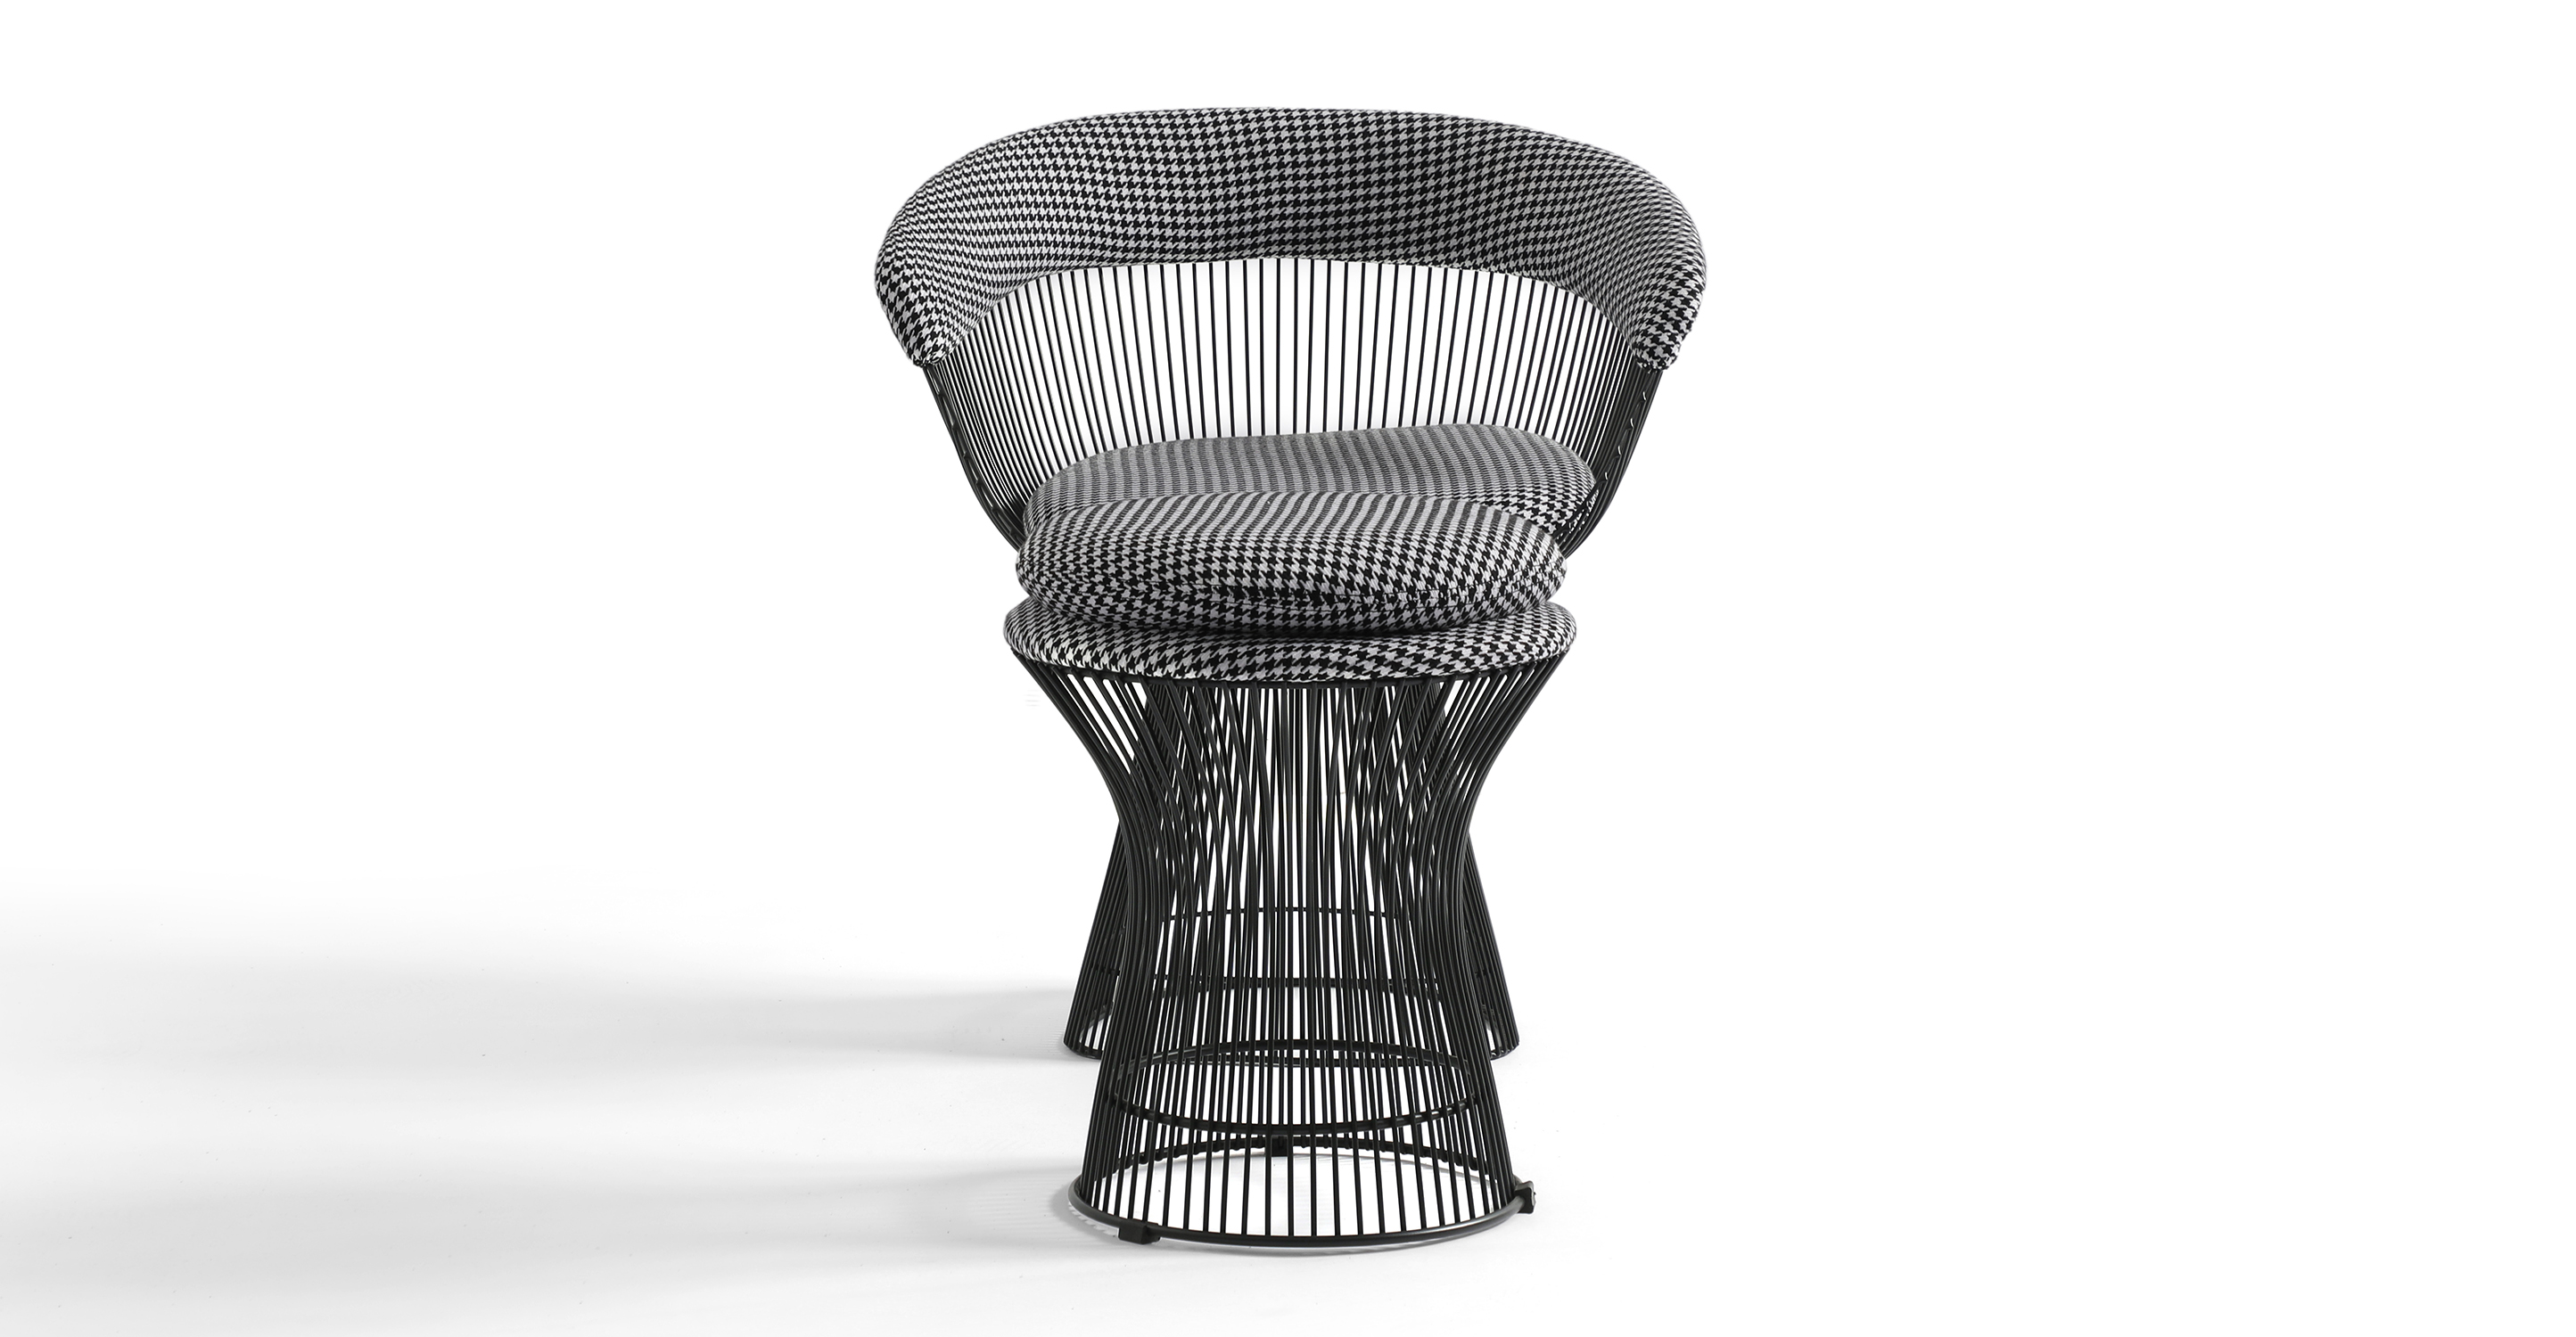 The Platner dining chairs have a wide base that tapers up and meets a bucket seat also made of black stainless steel rods. The arms and black are cushioned with upholstery and the seat has a removable cushion. 